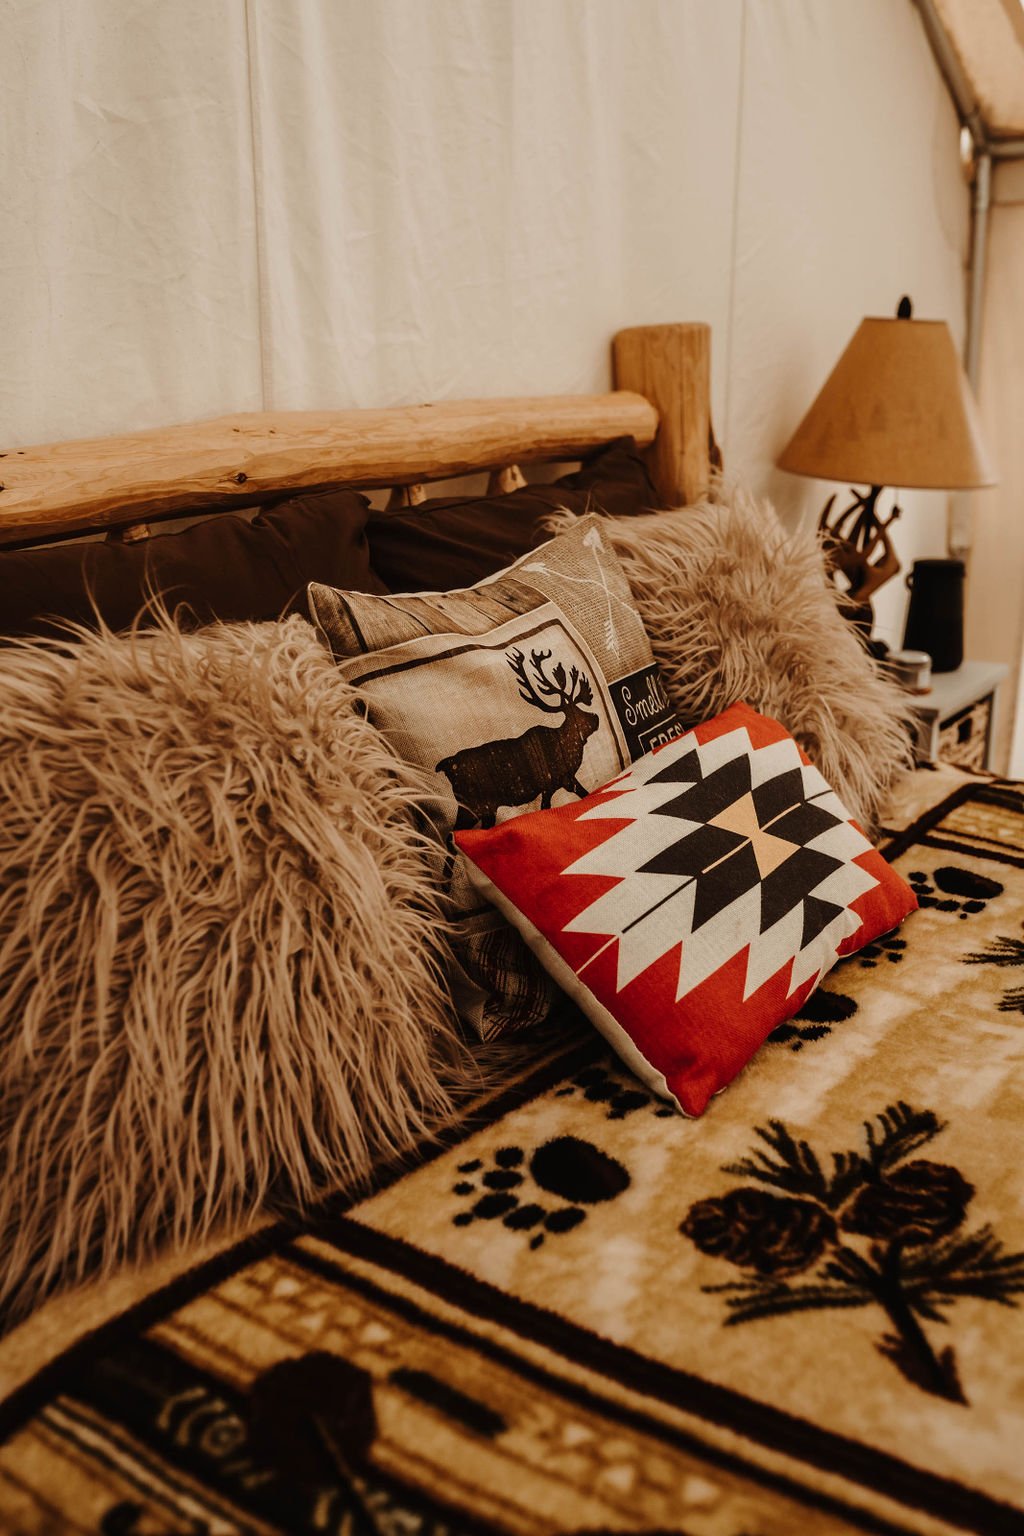 The Ranch Hand Glamping Tent at The Hohnstead Glamping Cabins Resort in Bonner Montana